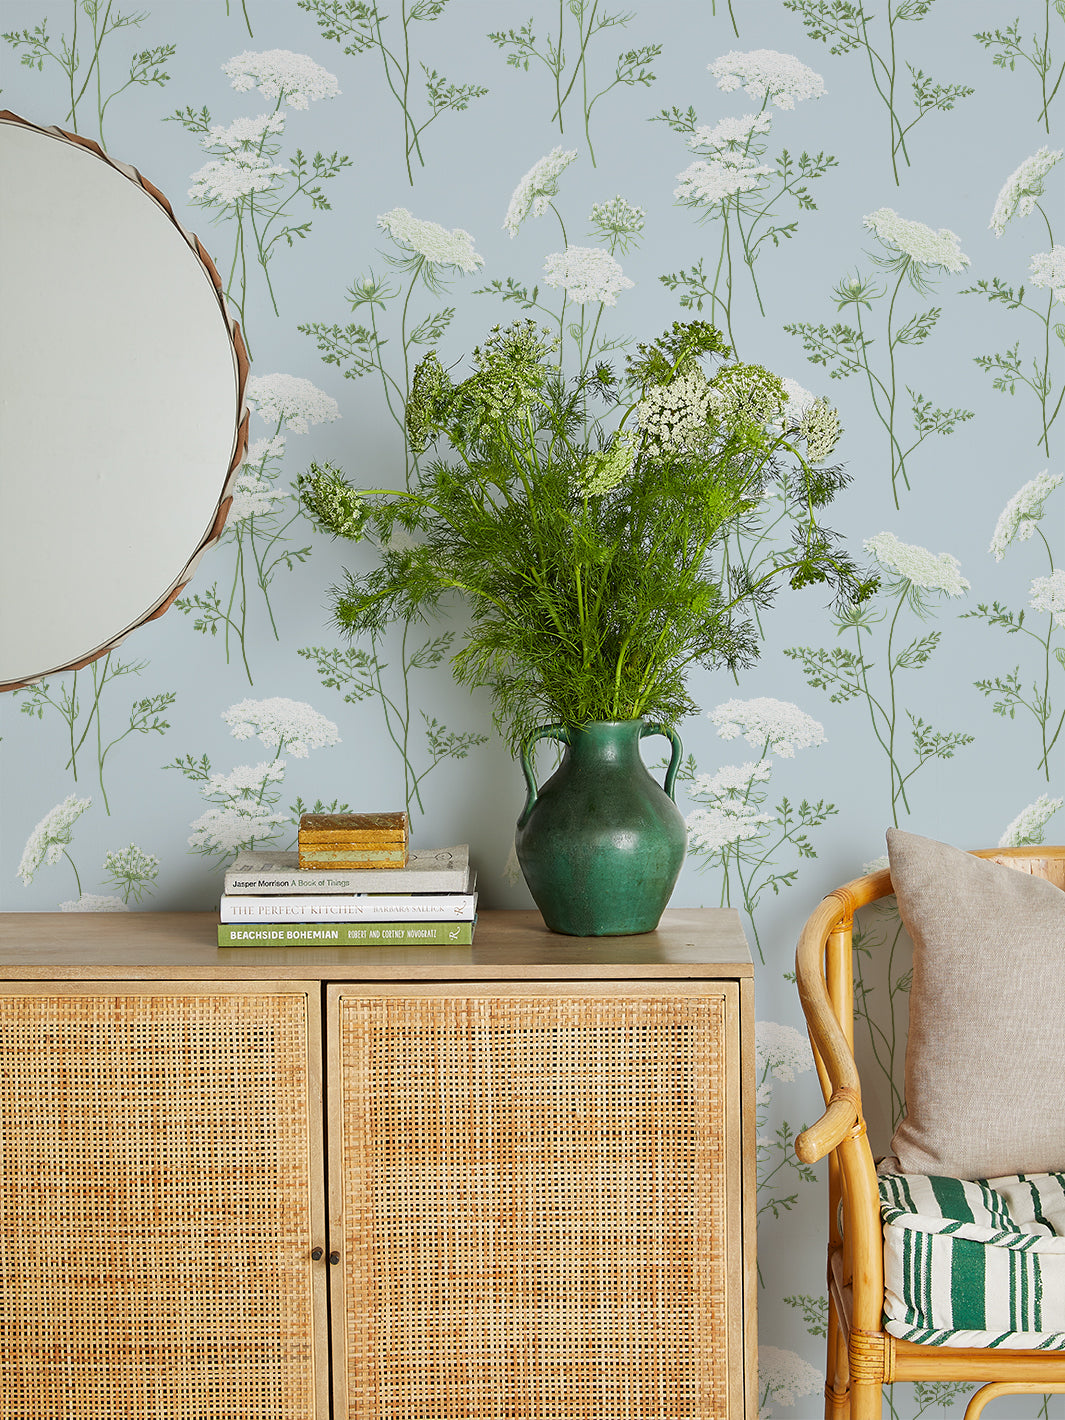 'The Queen's Lace' Wallpaper by Sarah Jessica Parker - Misty Blue